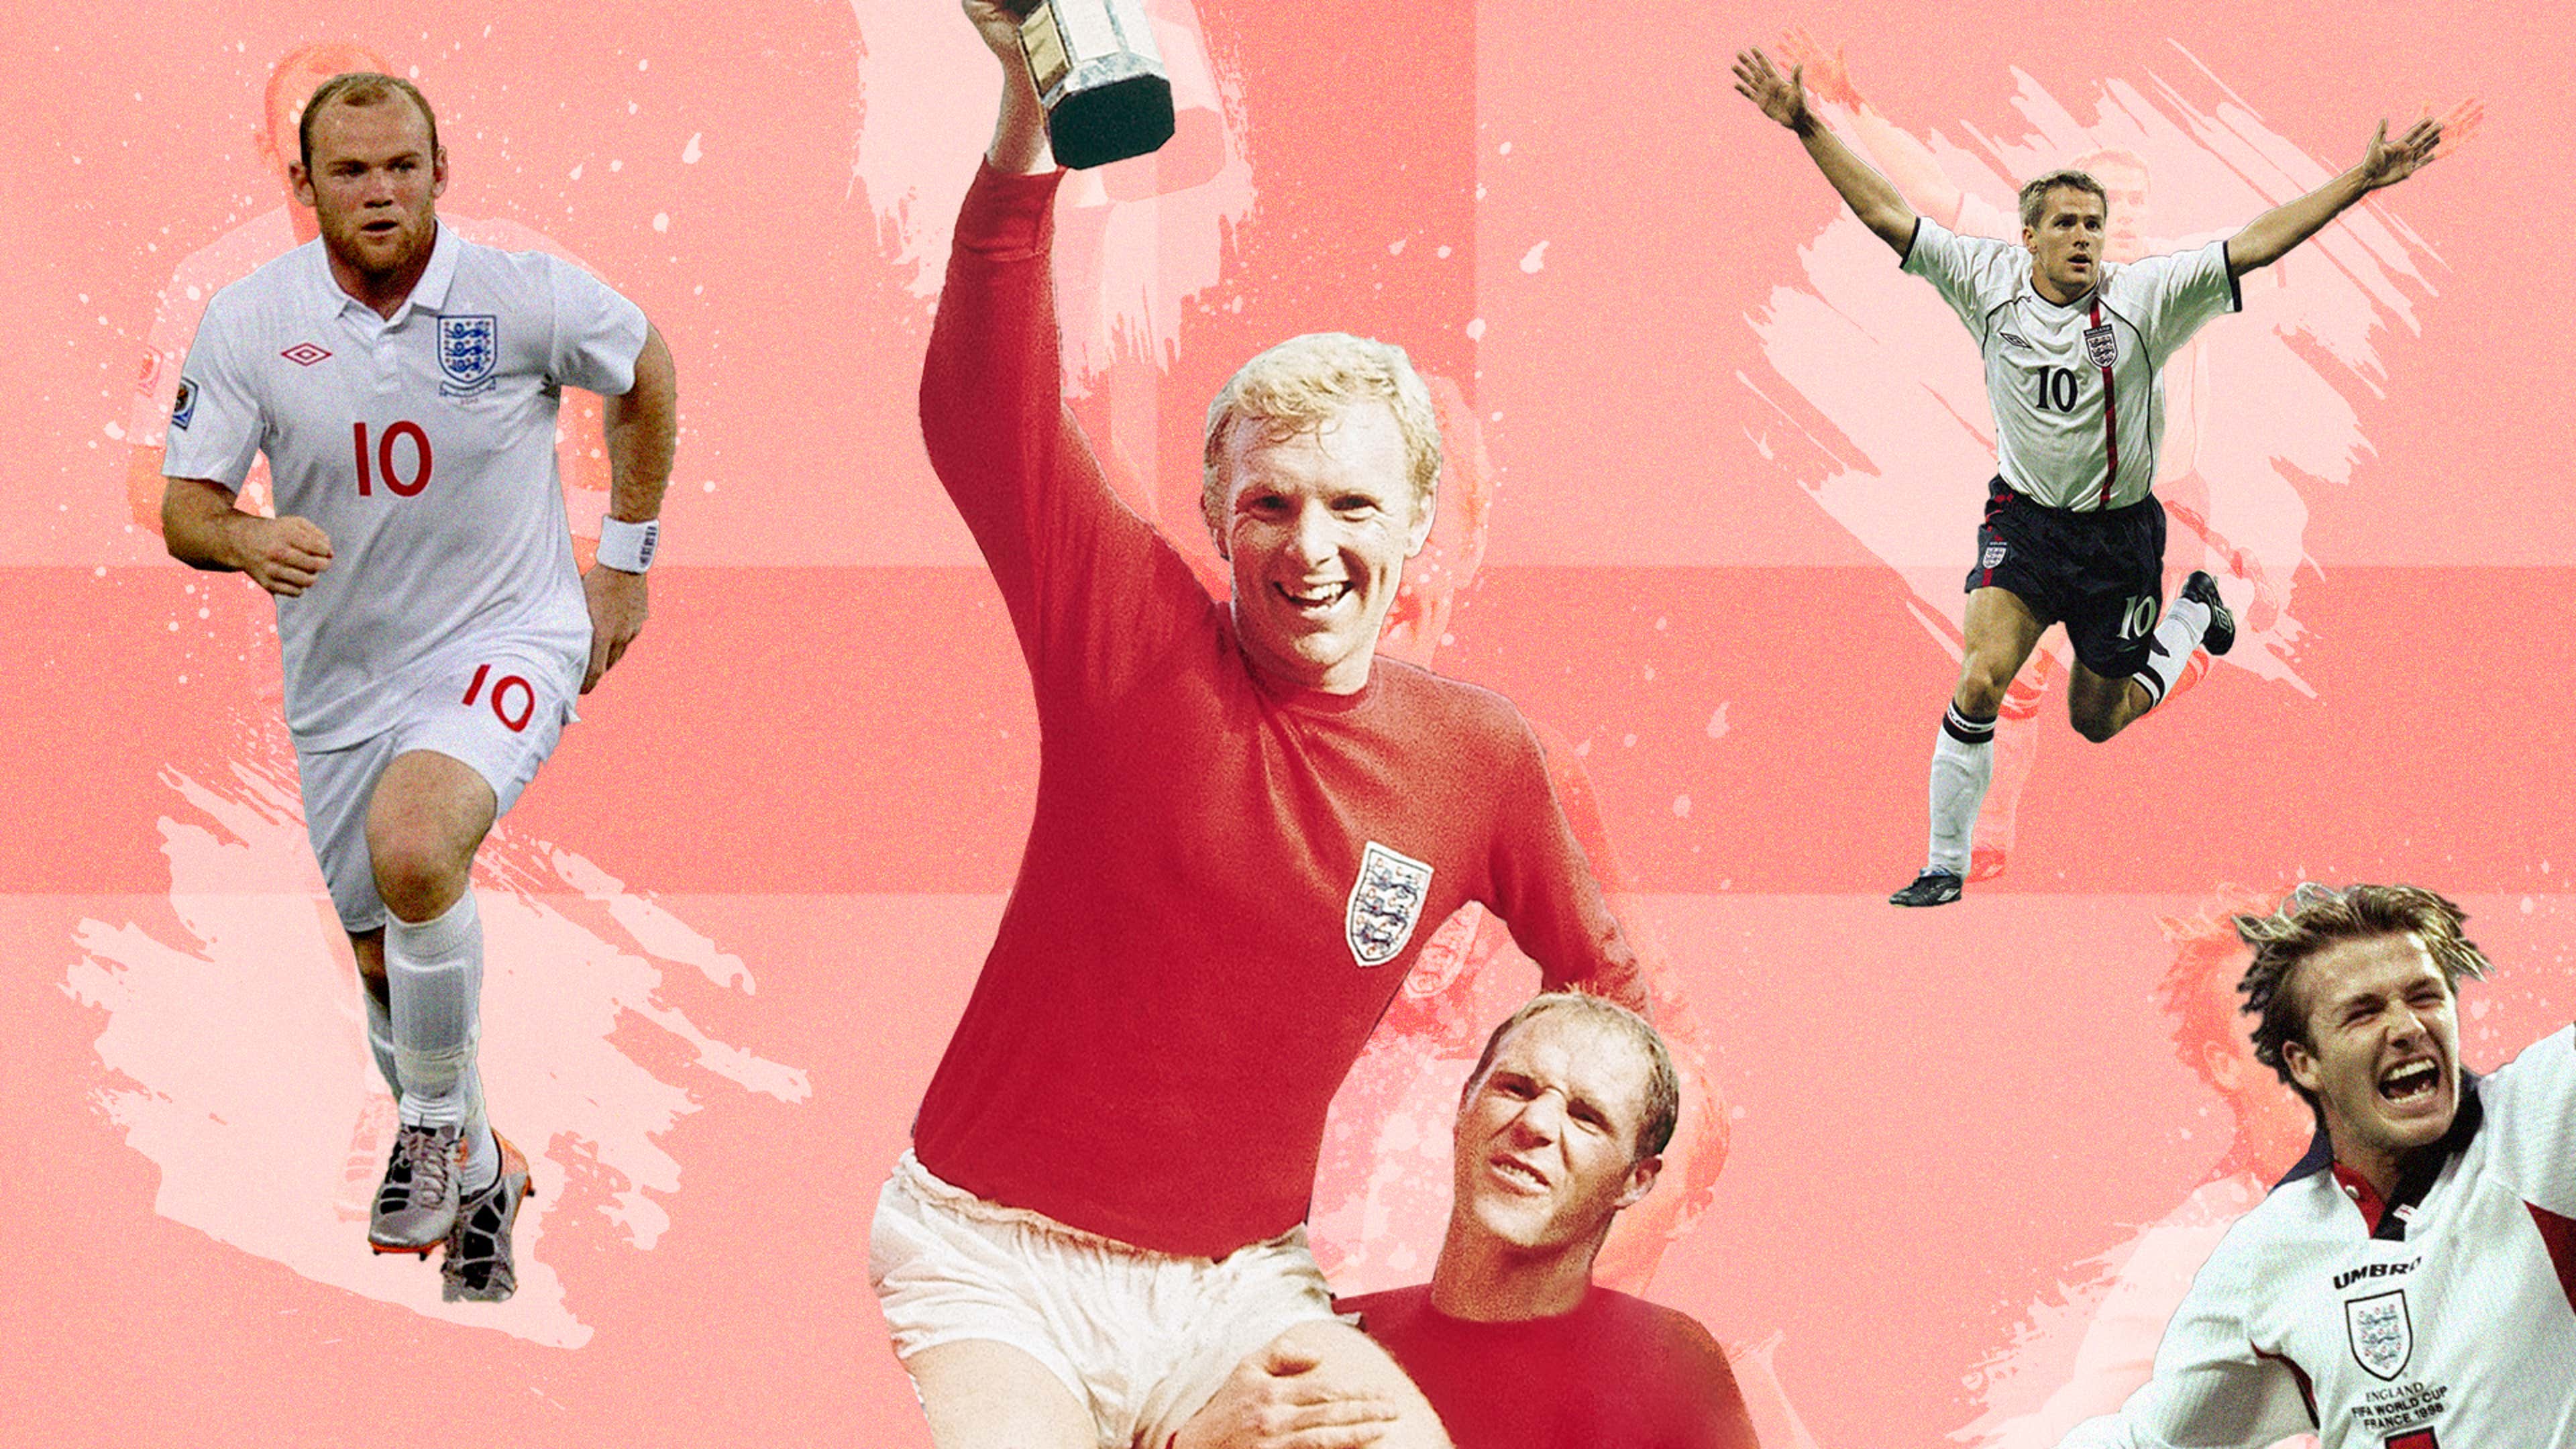 20 best football kits of all time, including England's 1966 strip